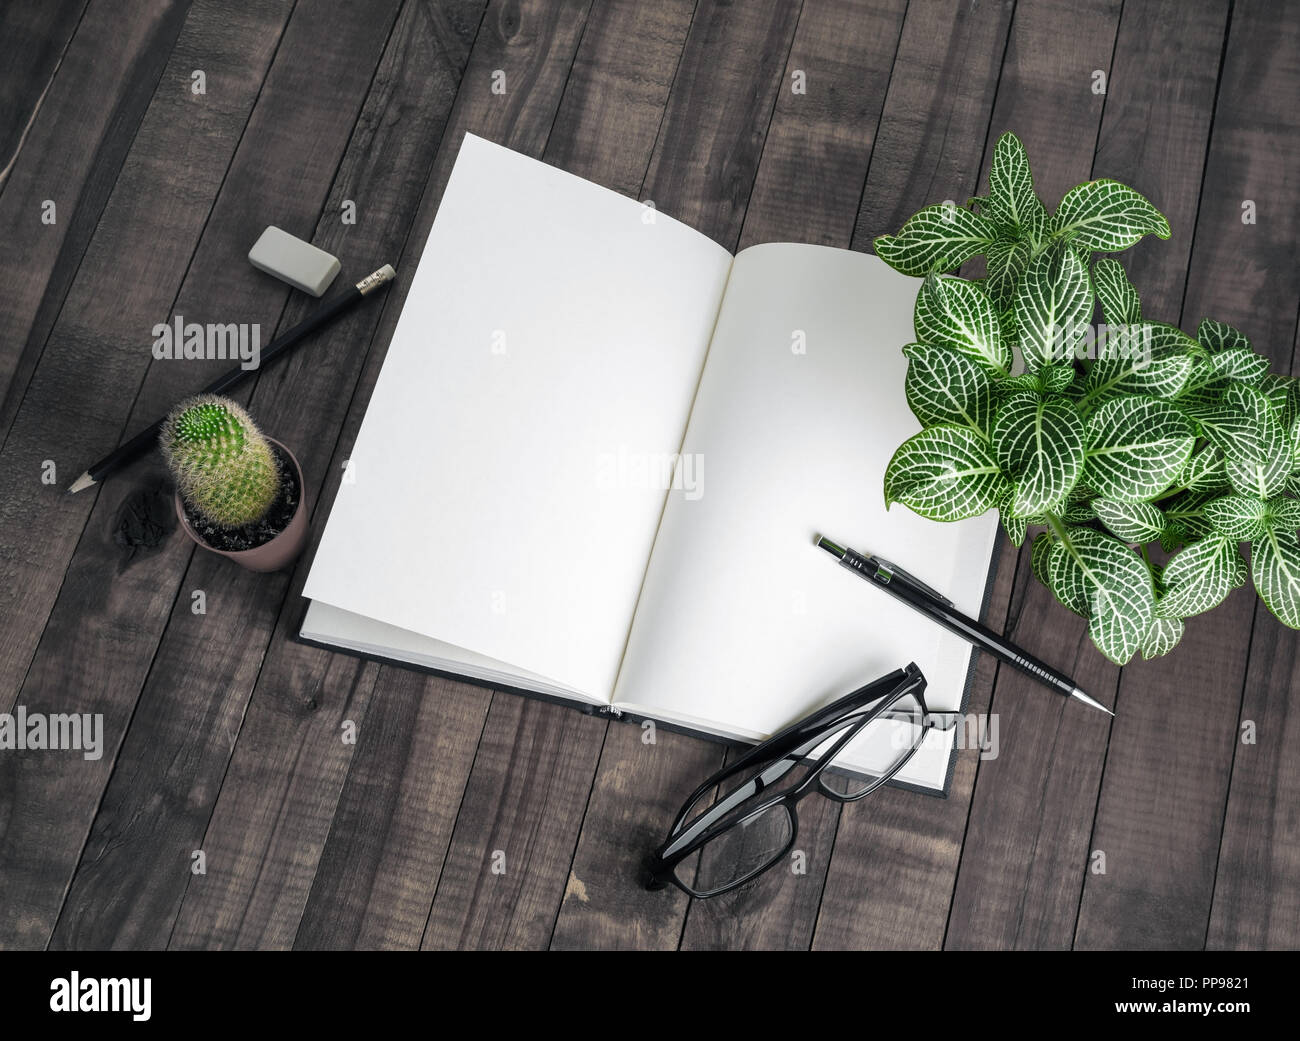 Blank open book, plants and stationery on wooden background. Responsive design mockup. Stock Photo